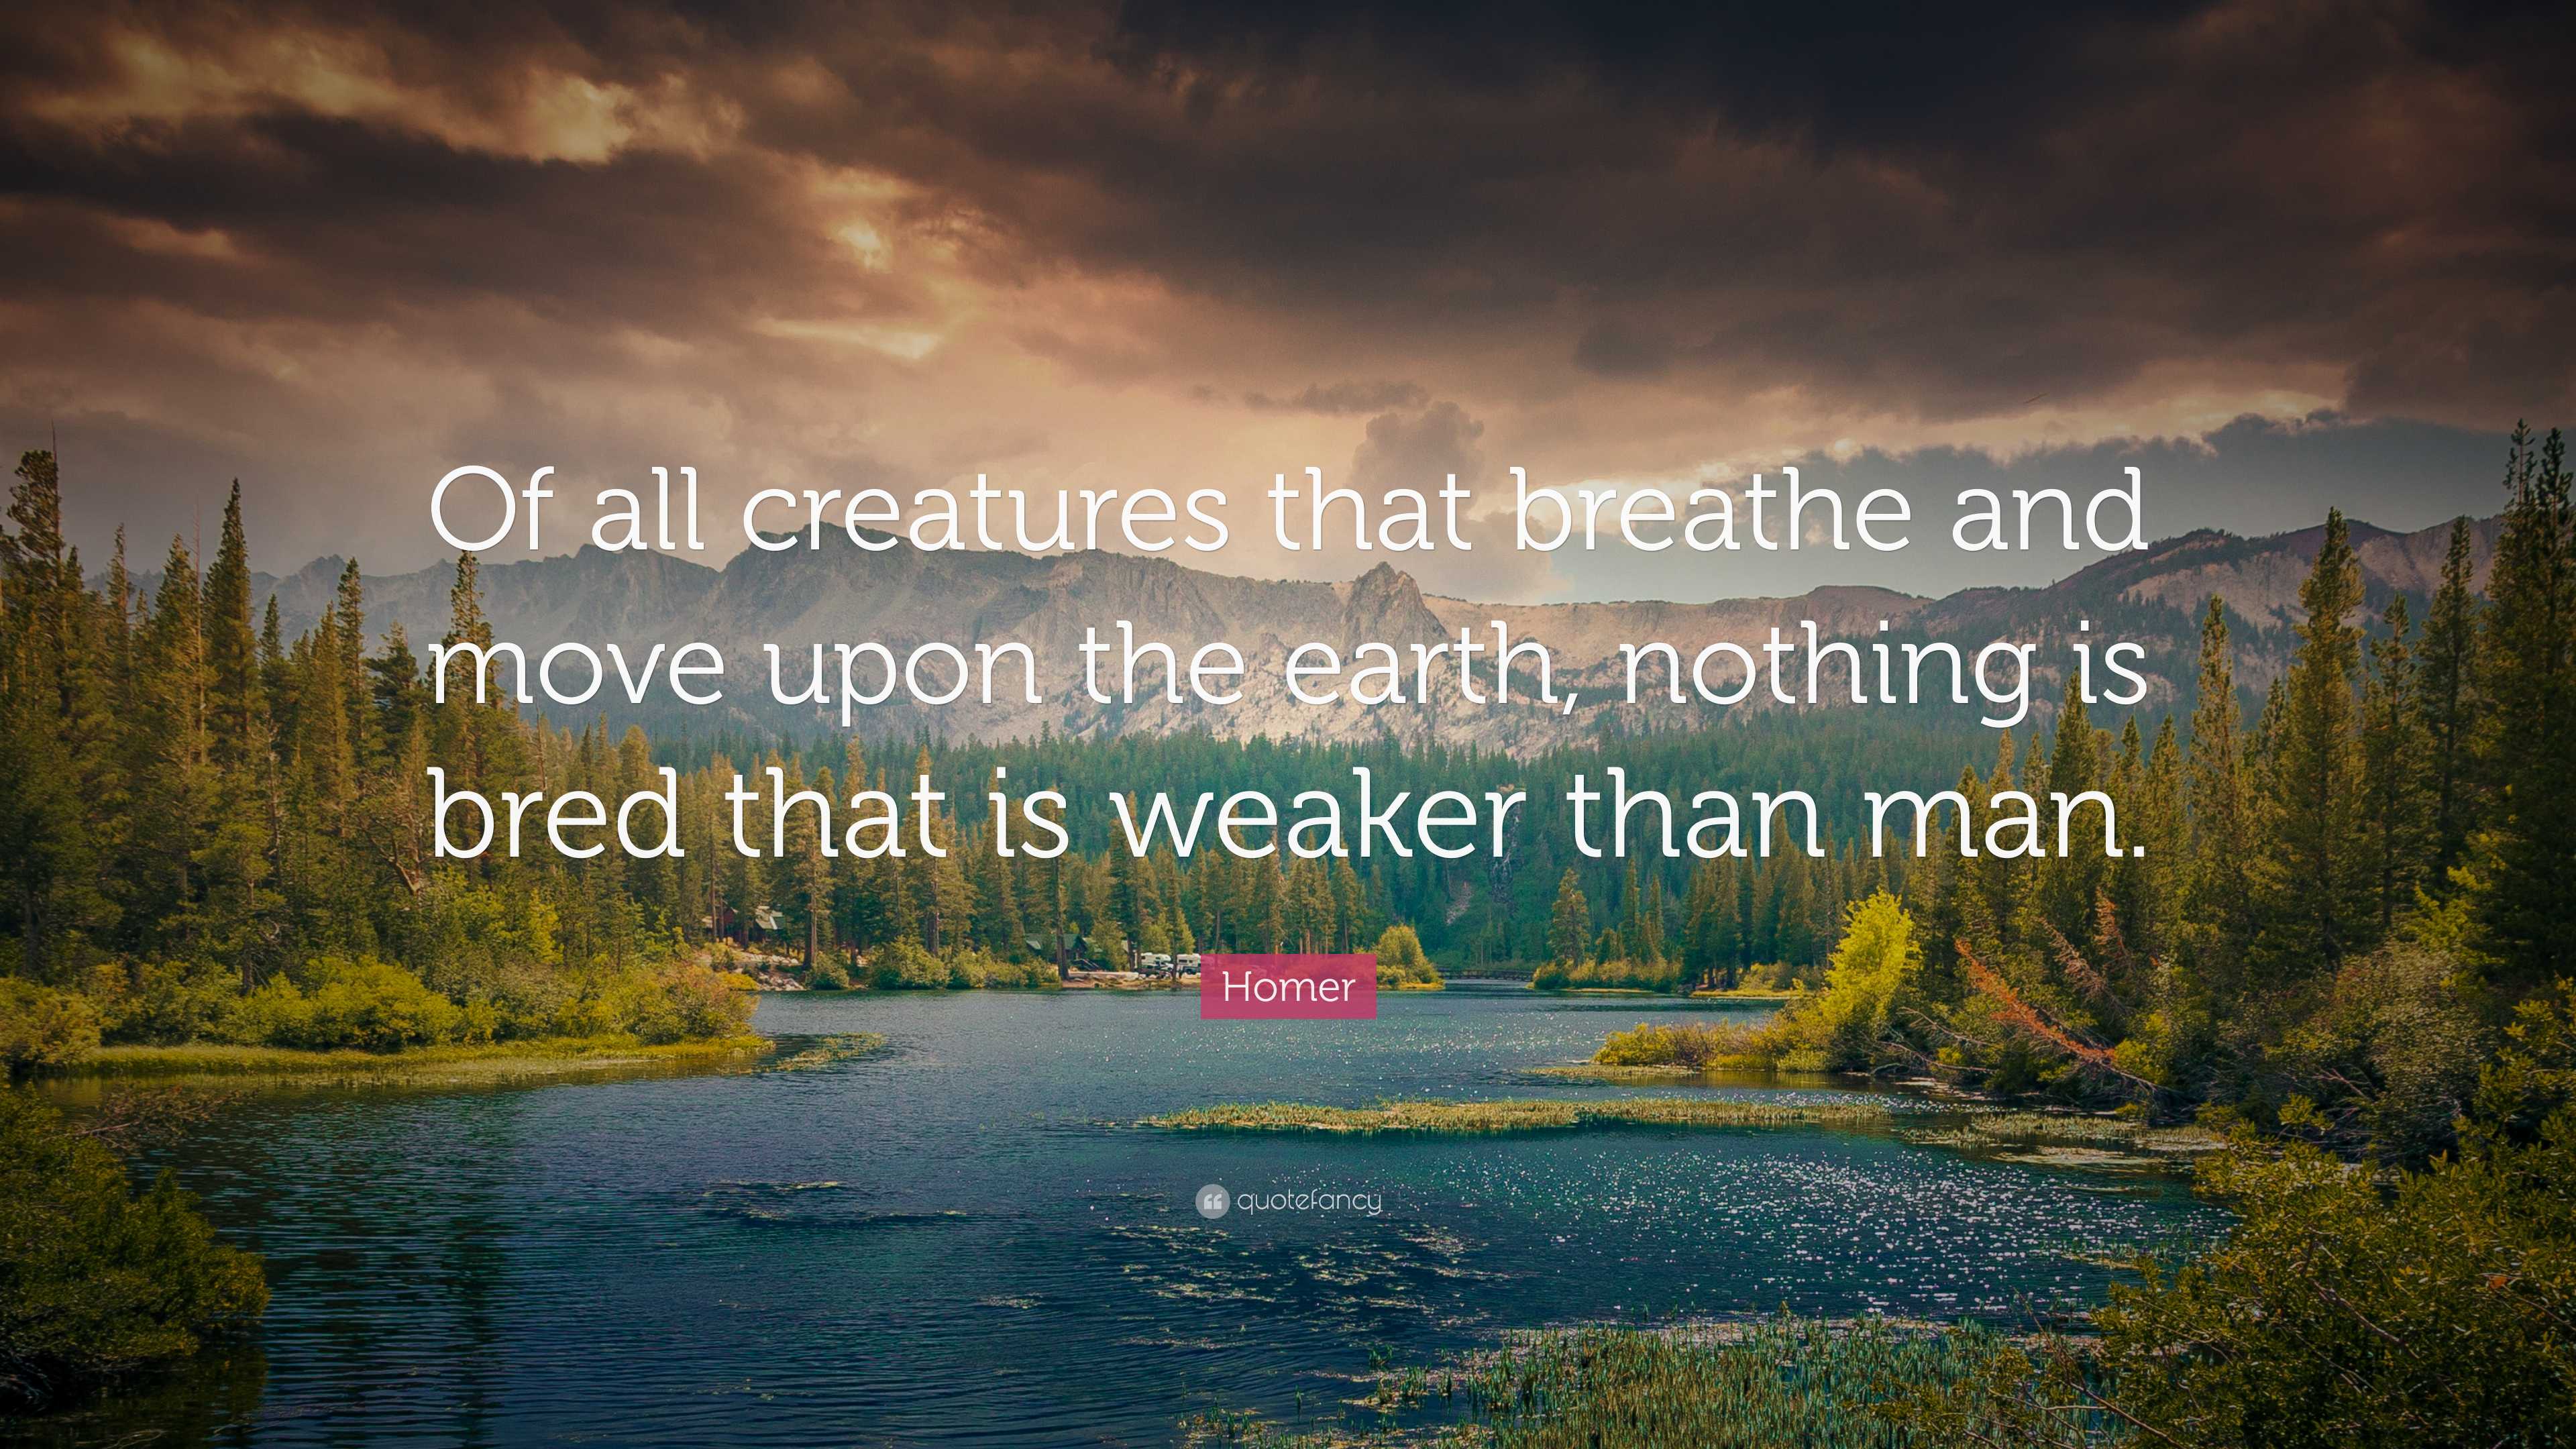 Homer Quote: “Of all creatures that breathe and move upon the earth ...